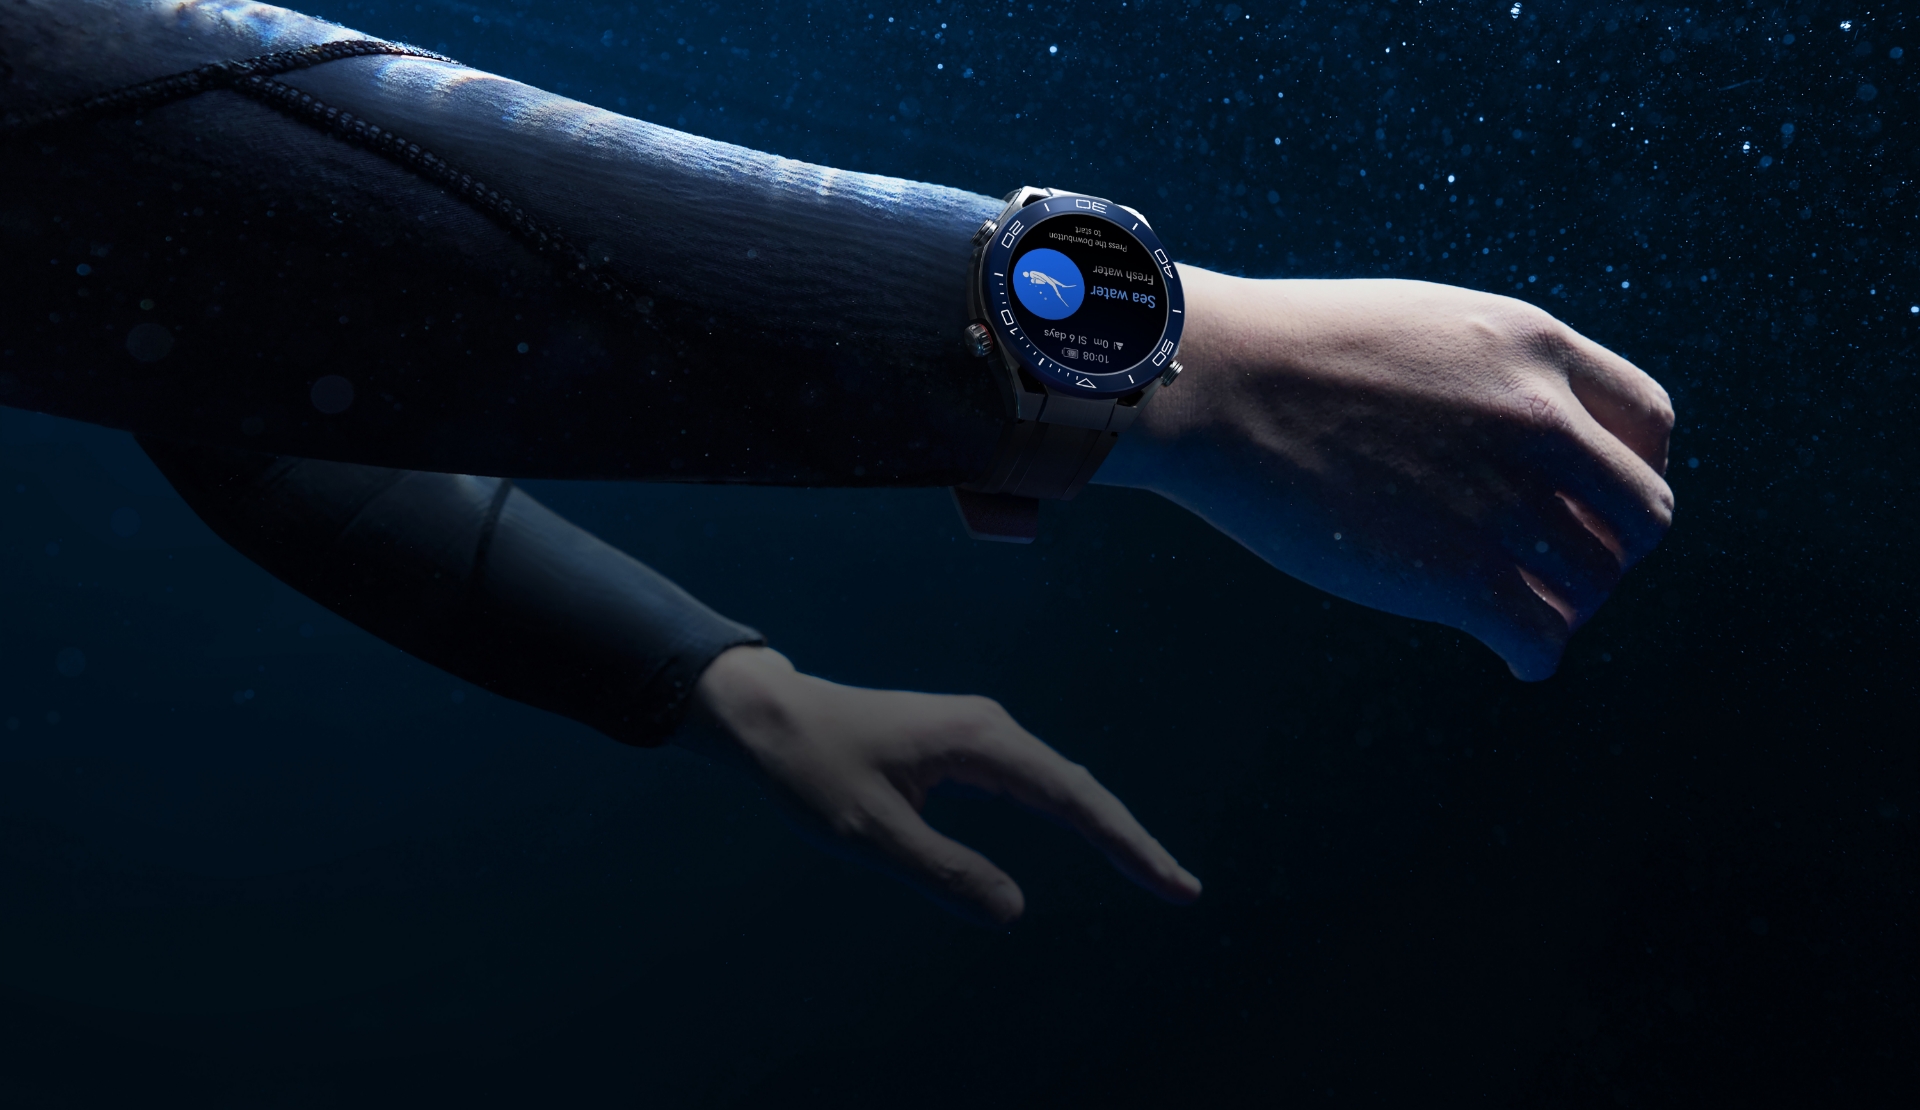 Huawei Watch Ultimate specs, price in the Philippines » YugaTech